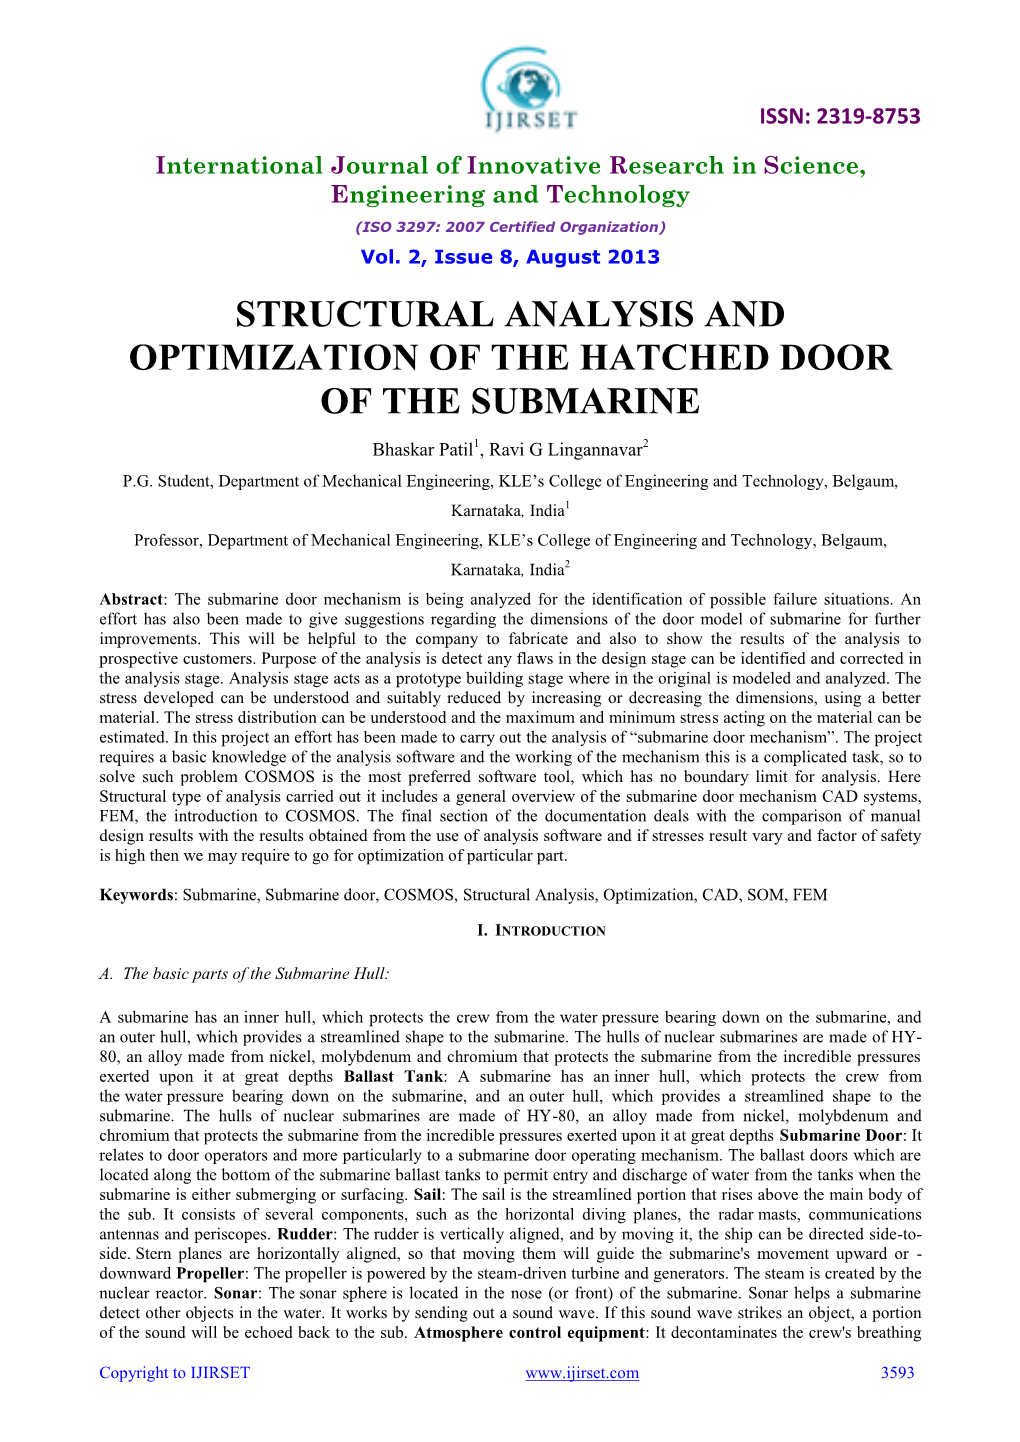 Structural Analysis and Optimization of the Hatched Door of the Submarine